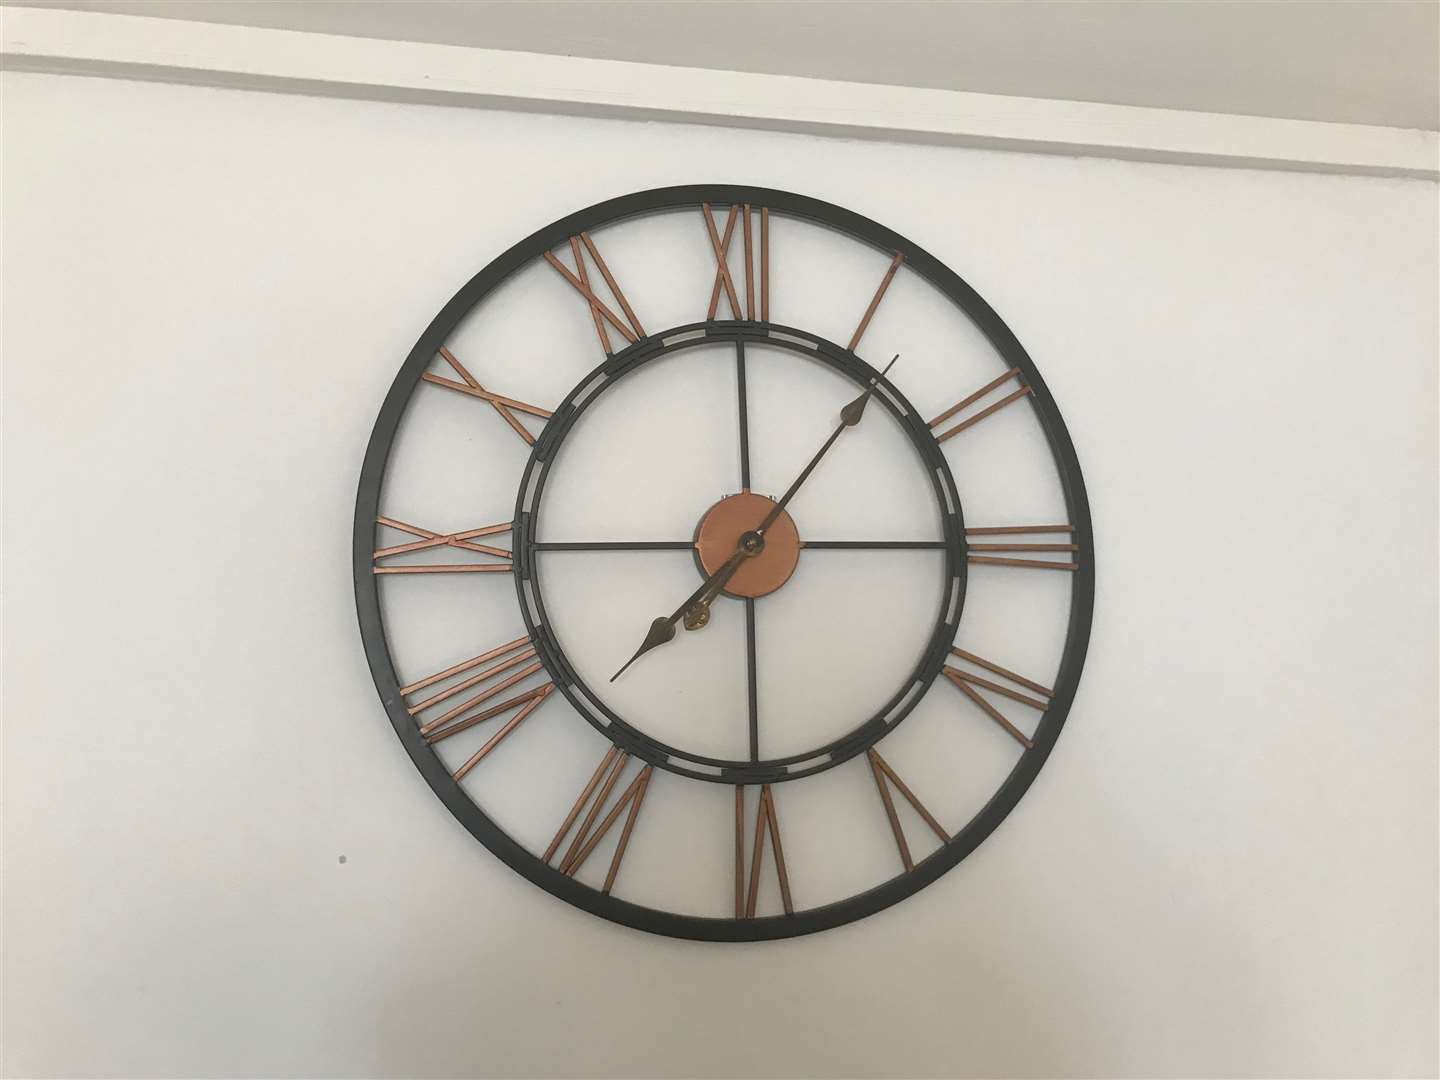 The clock on the wall, permanently stuck at seven minutes past seven